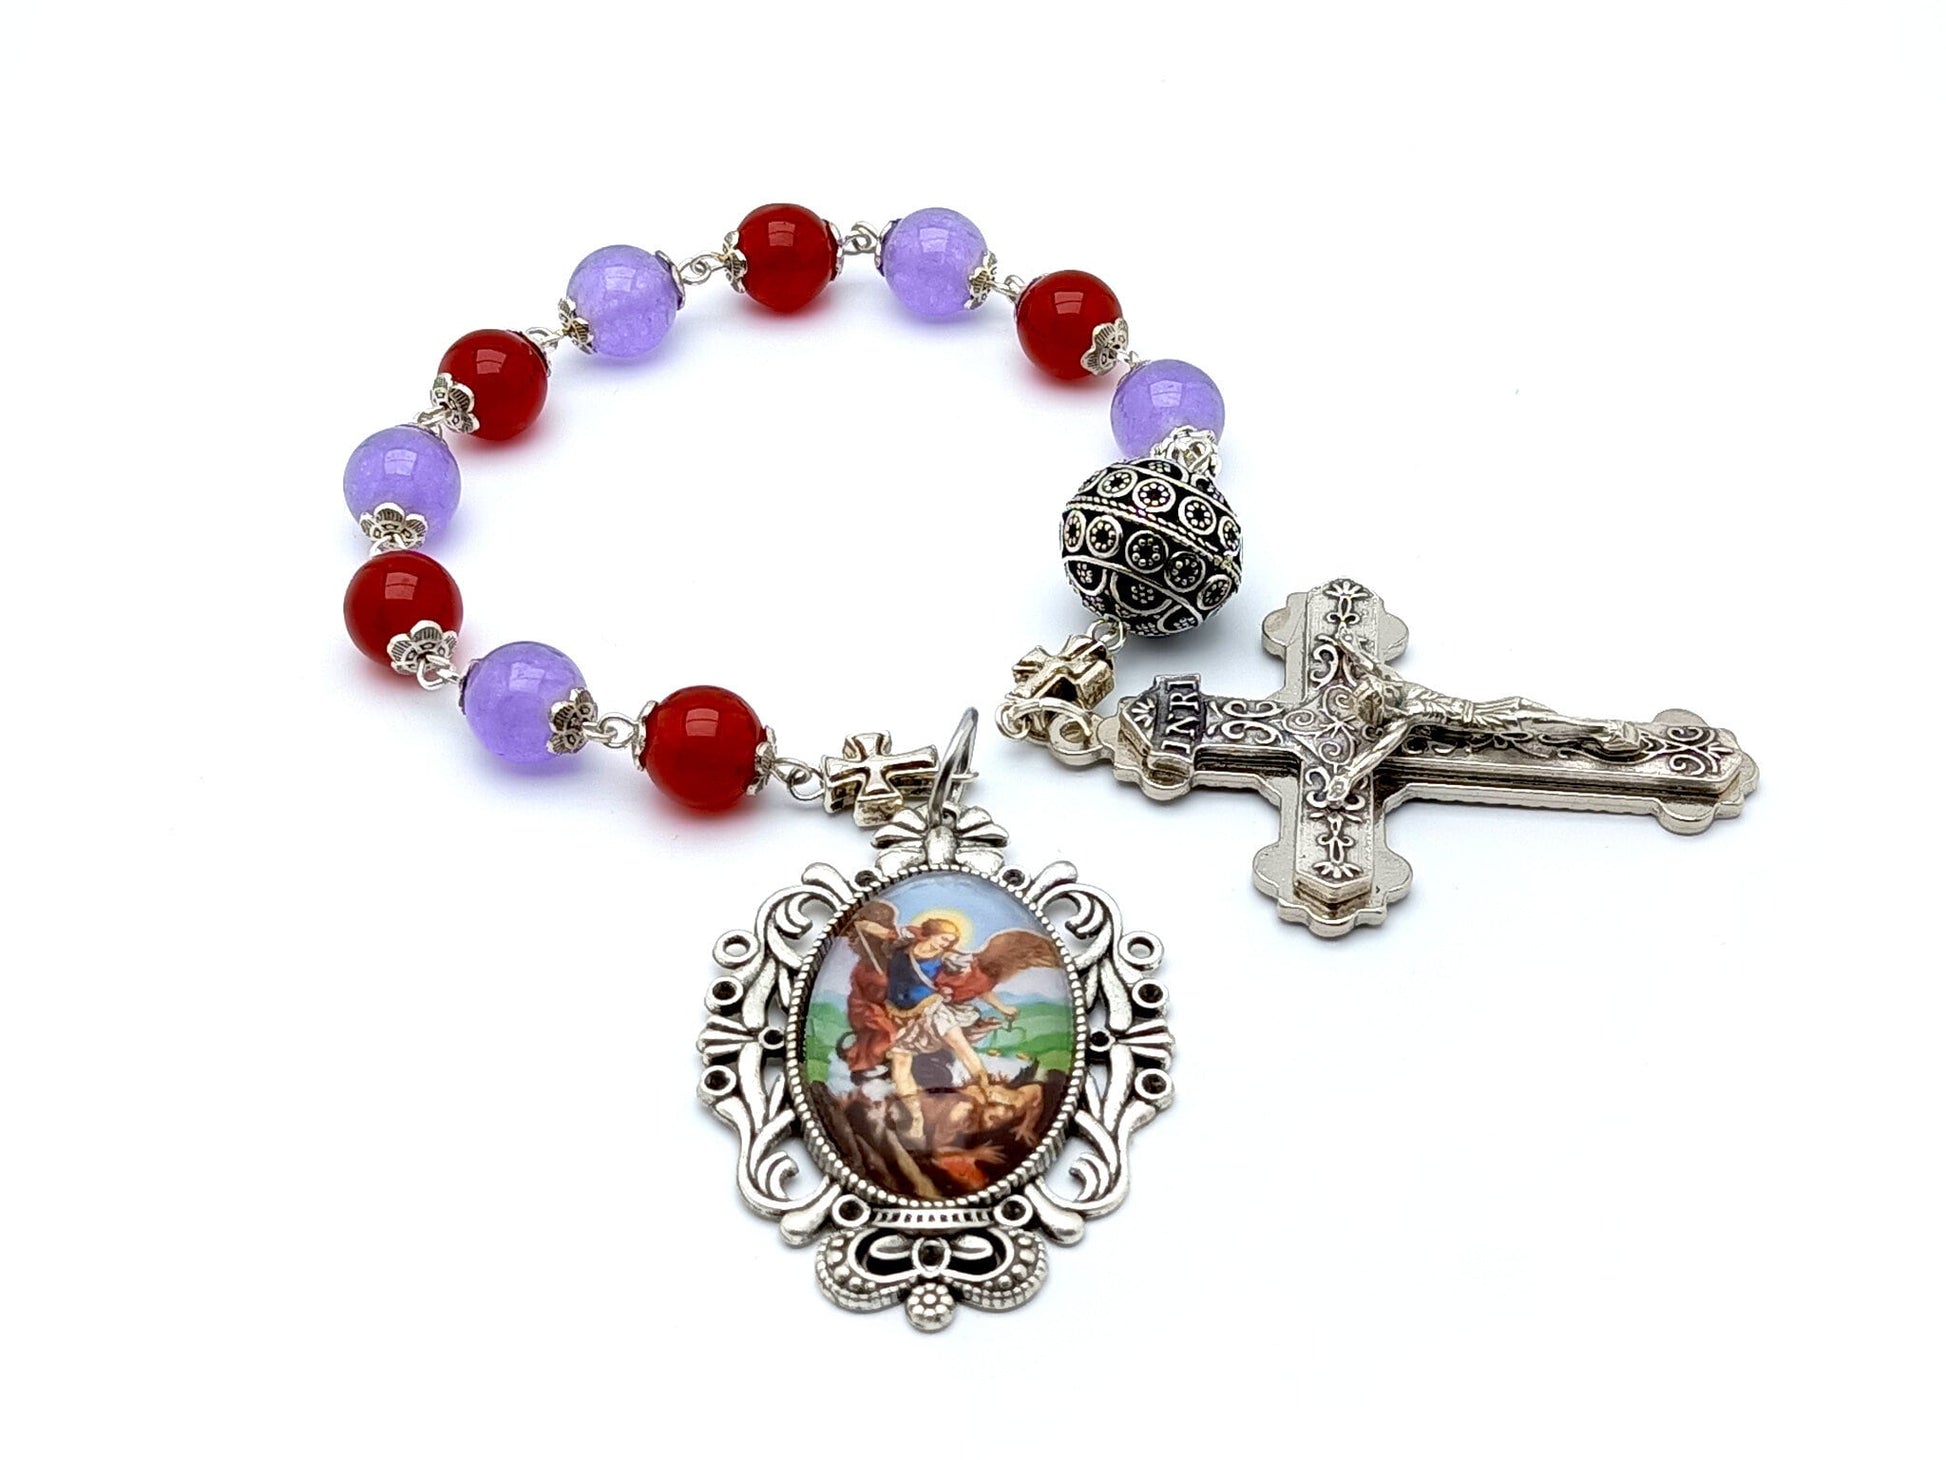 Saint Michael unique rosary beads single decade rosary with ruby and alexandrite gemstone beads, silver crucifix and picture end medal.